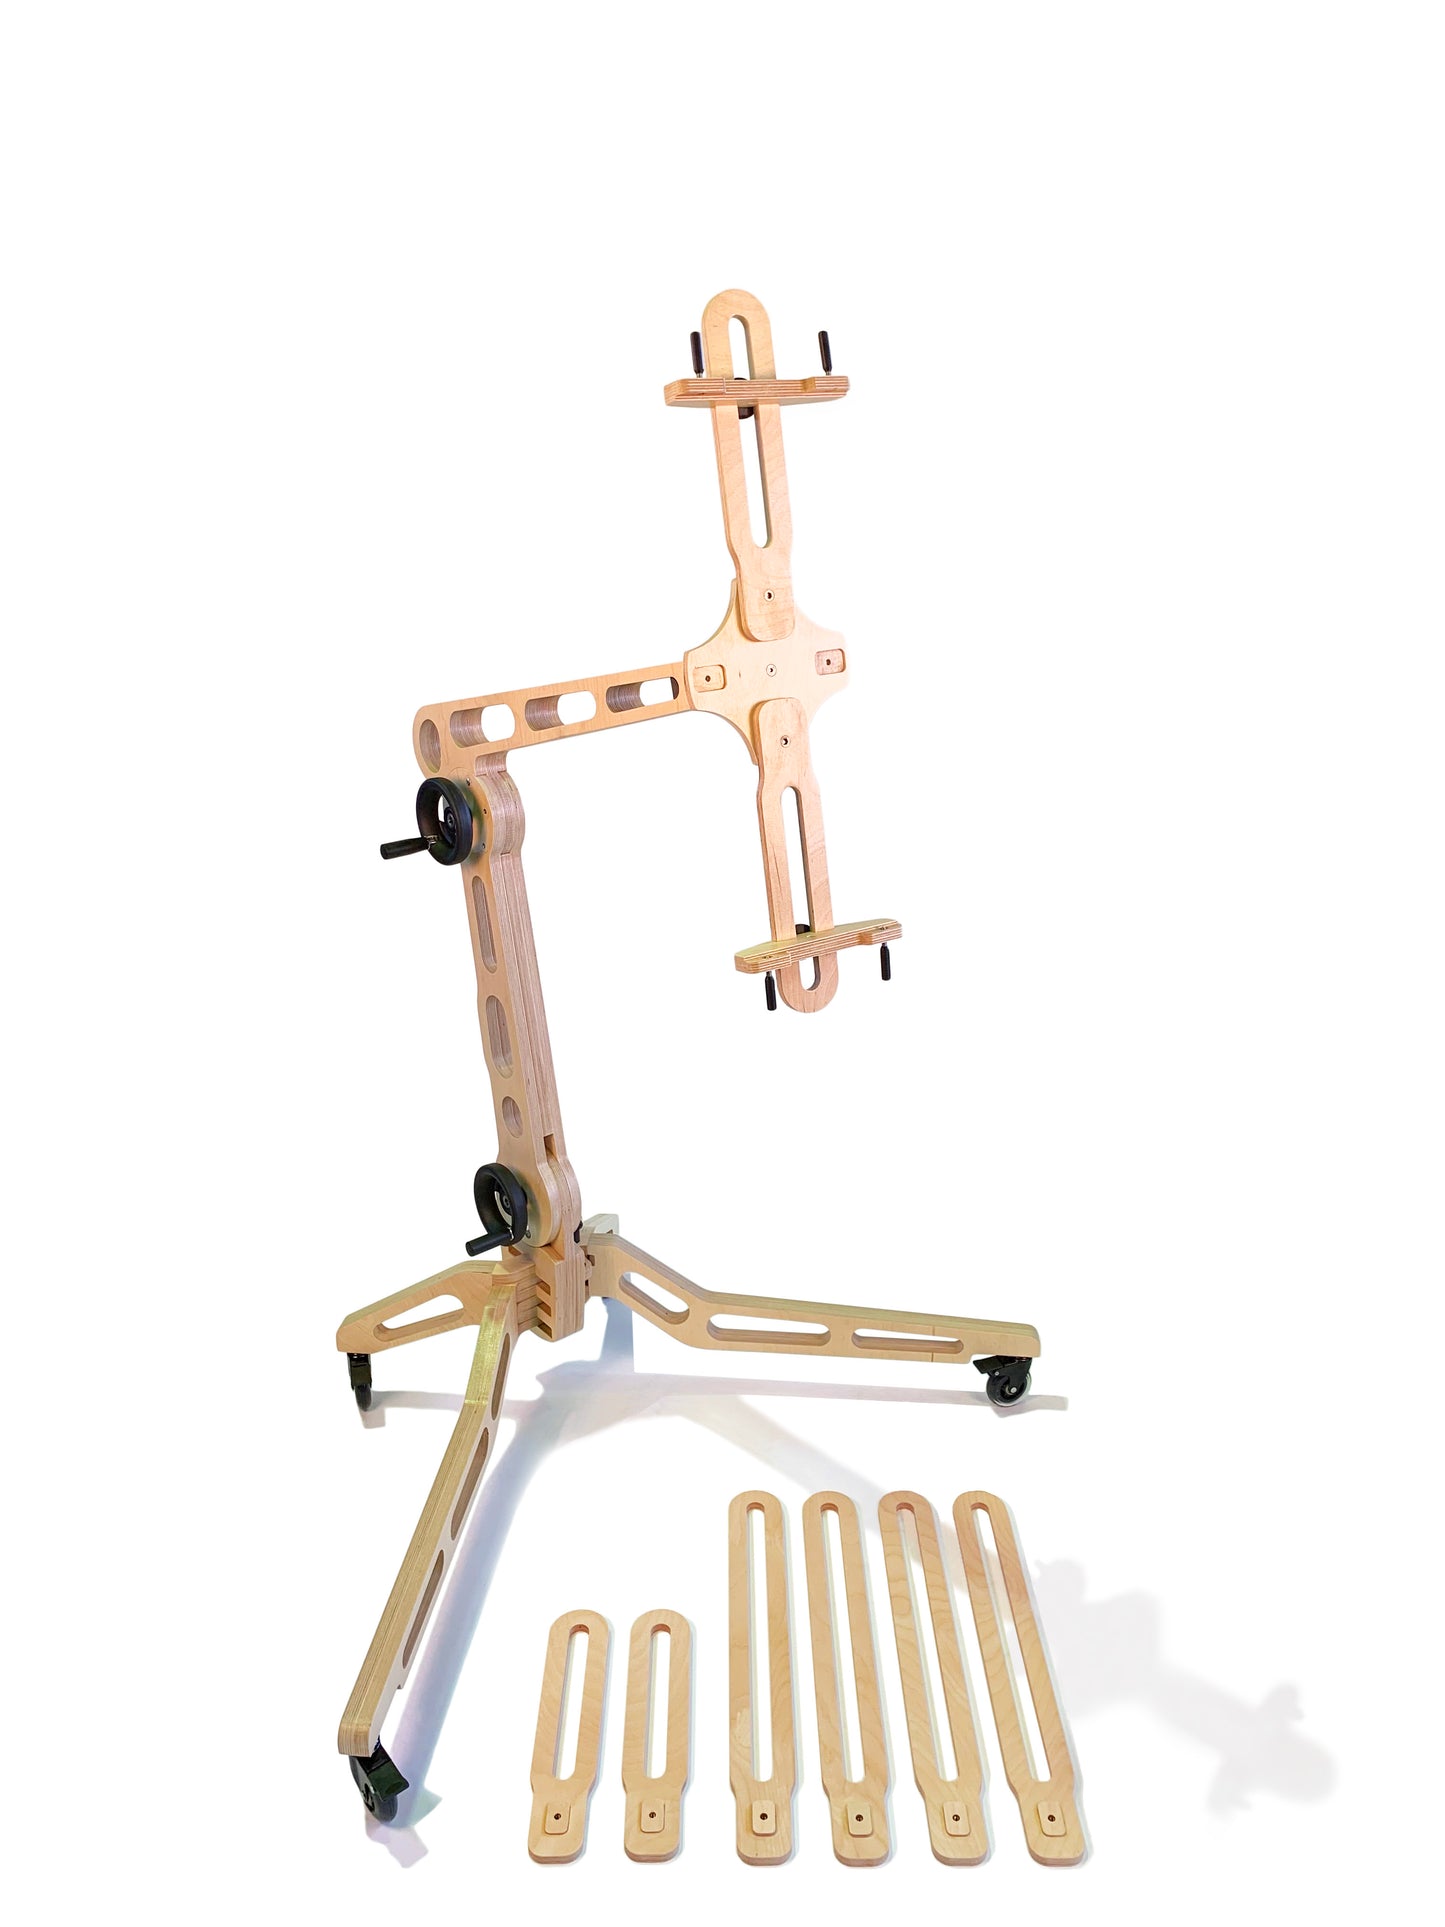 Freasel accessible easel product image front view with canvas holders shown